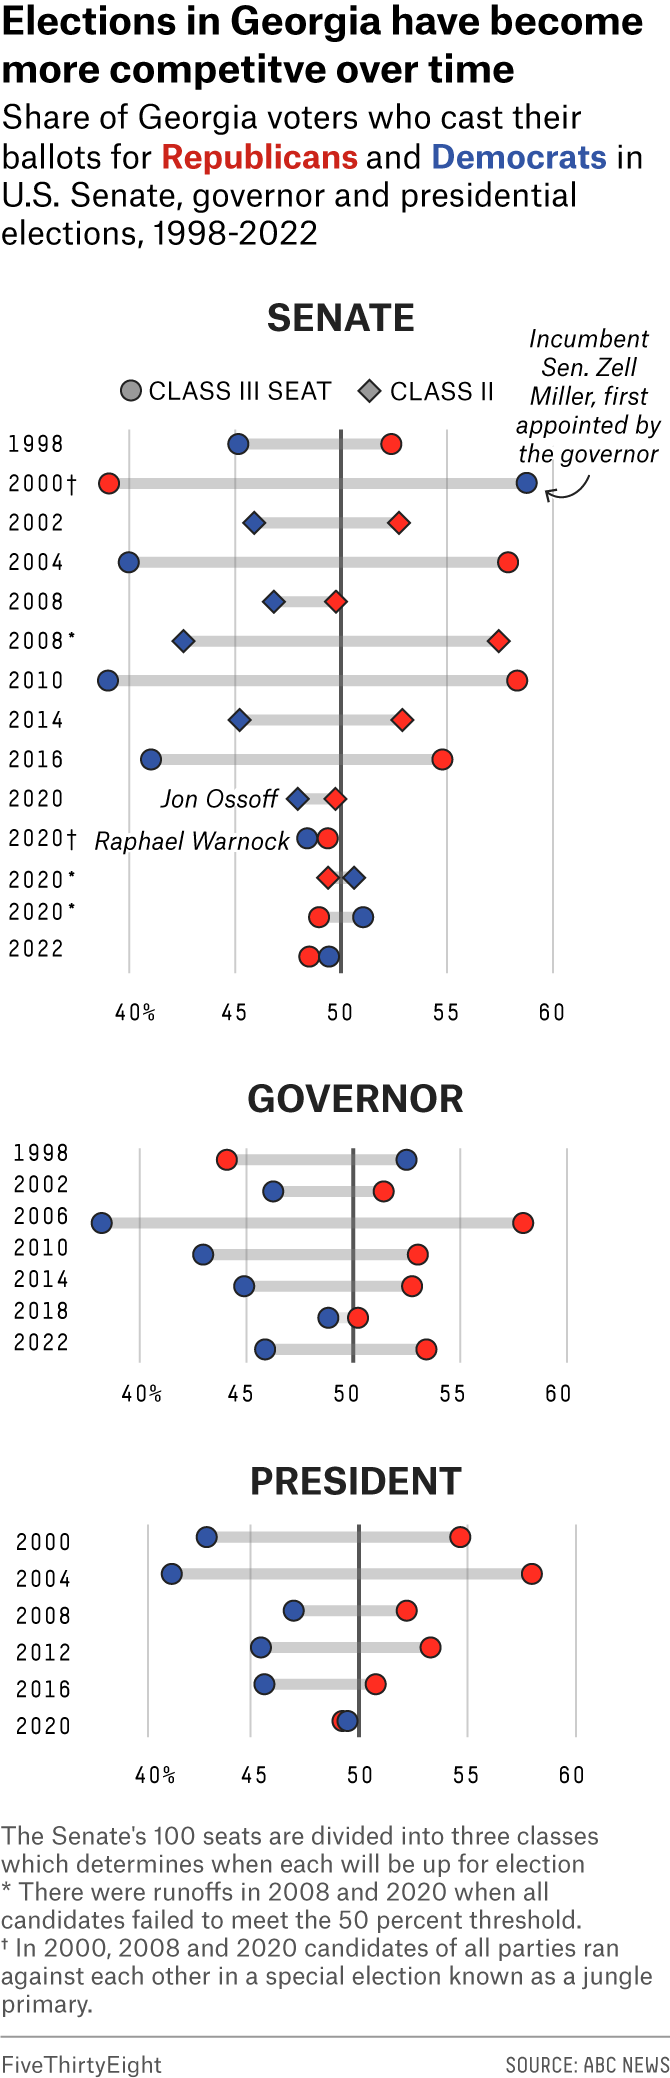 Three dot plots showing the share of Georgia voters who cast their ballots for Republican and Democrats in the U.S. Senate, governor and presidential elections from 1998-2022.